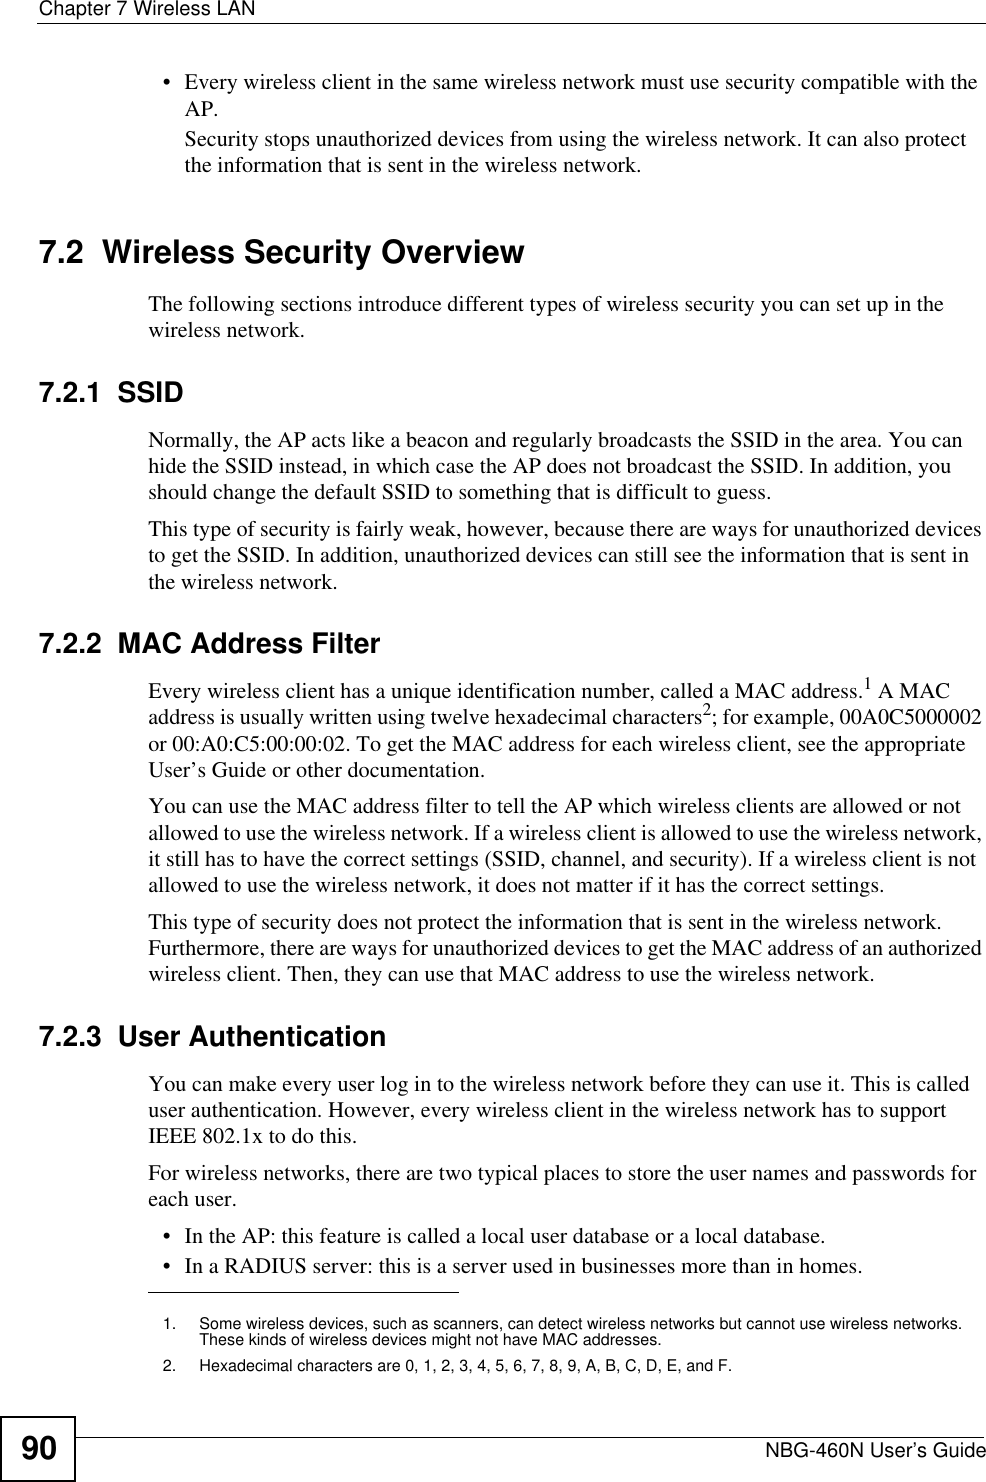 Chapter 7 Wireless LANNBG-460N User’s Guide90• Every wireless client in the same wireless network must use security compatible with the AP.Security stops unauthorized devices from using the wireless network. It can also protect the information that is sent in the wireless network.7.2  Wireless Security OverviewThe following sections introduce different types of wireless security you can set up in the wireless network.7.2.1  SSIDNormally, the AP acts like a beacon and regularly broadcasts the SSID in the area. You can hide the SSID instead, in which case the AP does not broadcast the SSID. In addition, you should change the default SSID to something that is difficult to guess.This type of security is fairly weak, however, because there are ways for unauthorized devices to get the SSID. In addition, unauthorized devices can still see the information that is sent in the wireless network.7.2.2  MAC Address FilterEvery wireless client has a unique identification number, called a MAC address.1 A MAC address is usually written using twelve hexadecimal characters2; for example, 00A0C5000002 or 00:A0:C5:00:00:02. To get the MAC address for each wireless client, see the appropriate User’s Guide or other documentation.You can use the MAC address filter to tell the AP which wireless clients are allowed or not allowed to use the wireless network. If a wireless client is allowed to use the wireless network, it still has to have the correct settings (SSID, channel, and security). If a wireless client is not allowed to use the wireless network, it does not matter if it has the correct settings.This type of security does not protect the information that is sent in the wireless network. Furthermore, there are ways for unauthorized devices to get the MAC address of an authorized wireless client. Then, they can use that MAC address to use the wireless network.7.2.3  User AuthenticationYou can make every user log in to the wireless network before they can use it. This is called user authentication. However, every wireless client in the wireless network has to support IEEE 802.1x to do this.For wireless networks, there are two typical places to store the user names and passwords for each user.• In the AP: this feature is called a local user database or a local database.• In a RADIUS server: this is a server used in businesses more than in homes.1. Some wireless devices, such as scanners, can detect wireless networks but cannot use wireless networks. These kinds of wireless devices might not have MAC addresses.2. Hexadecimal characters are 0, 1, 2, 3, 4, 5, 6, 7, 8, 9, A, B, C, D, E, and F.